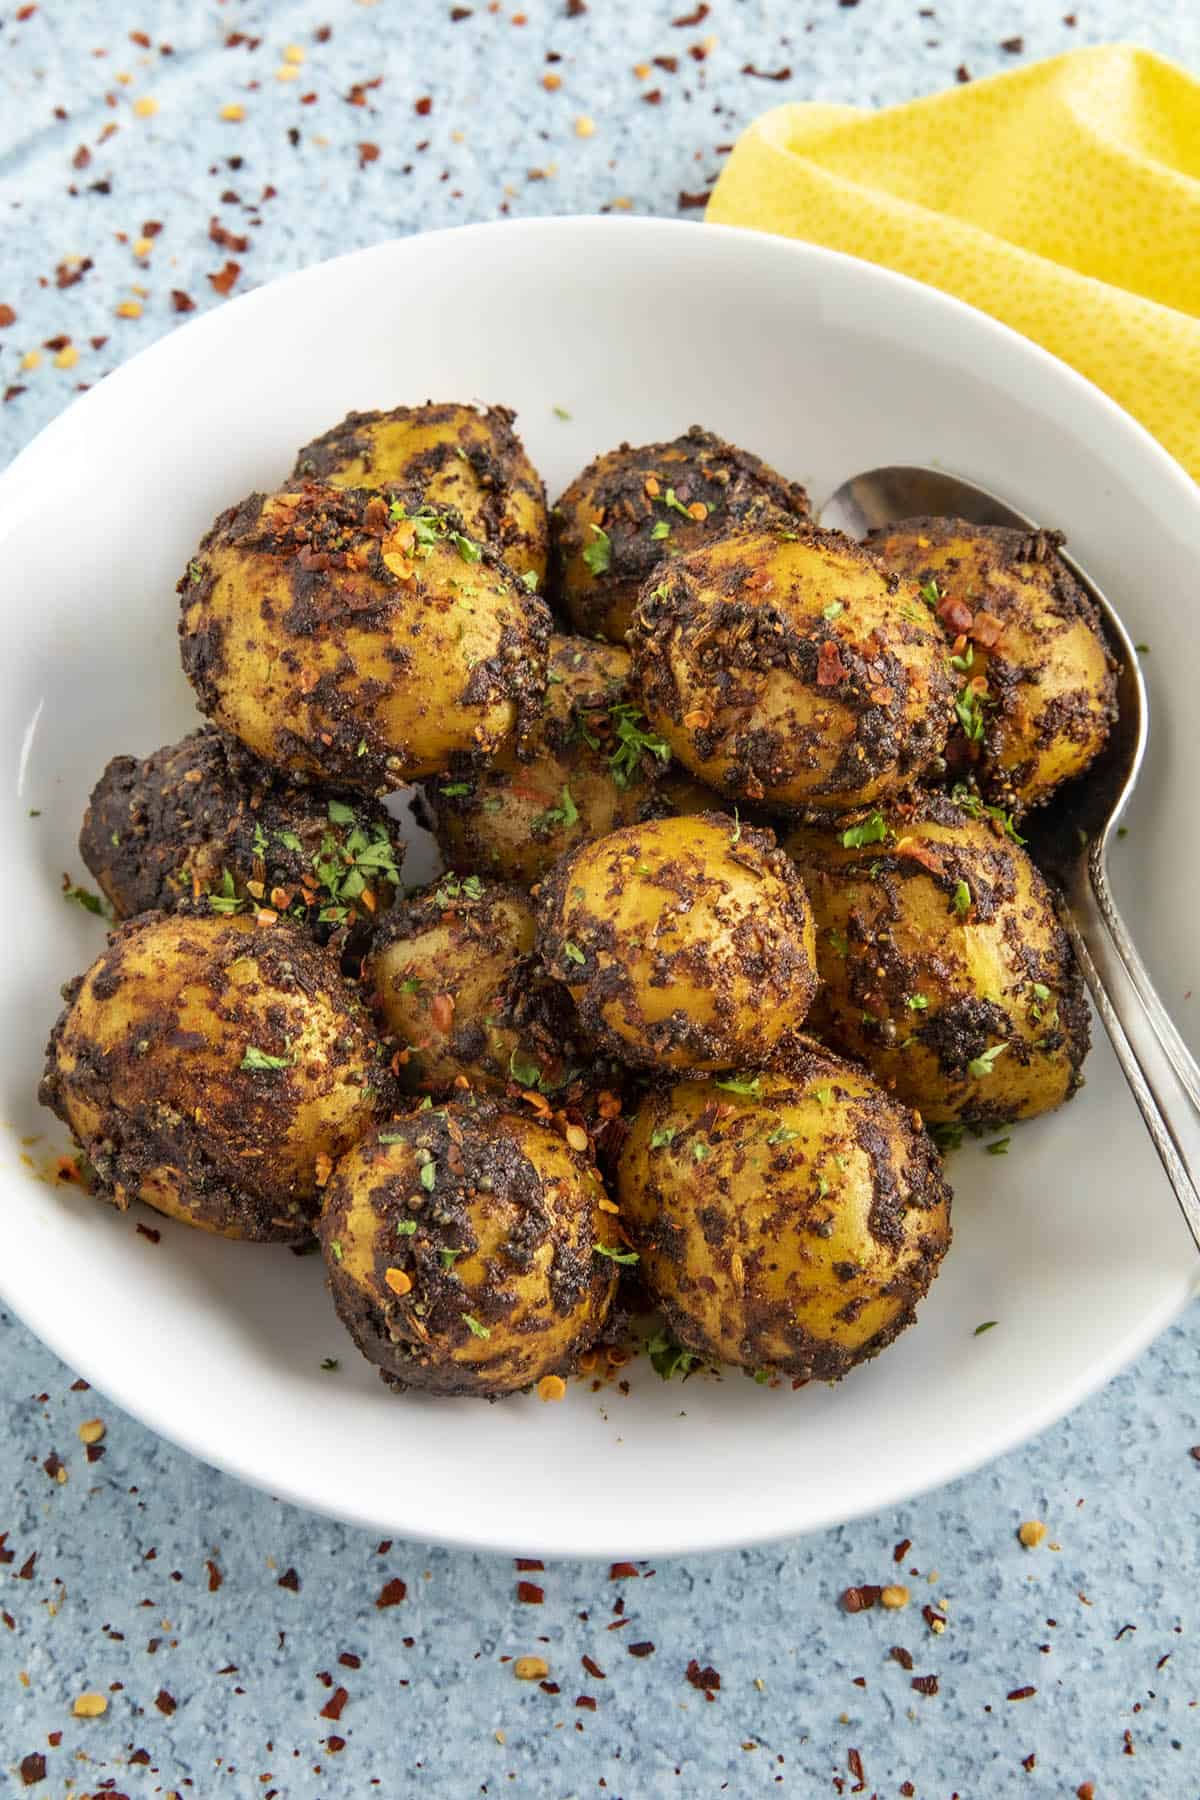 Bombay Potatoes in a bowl, ready to serve